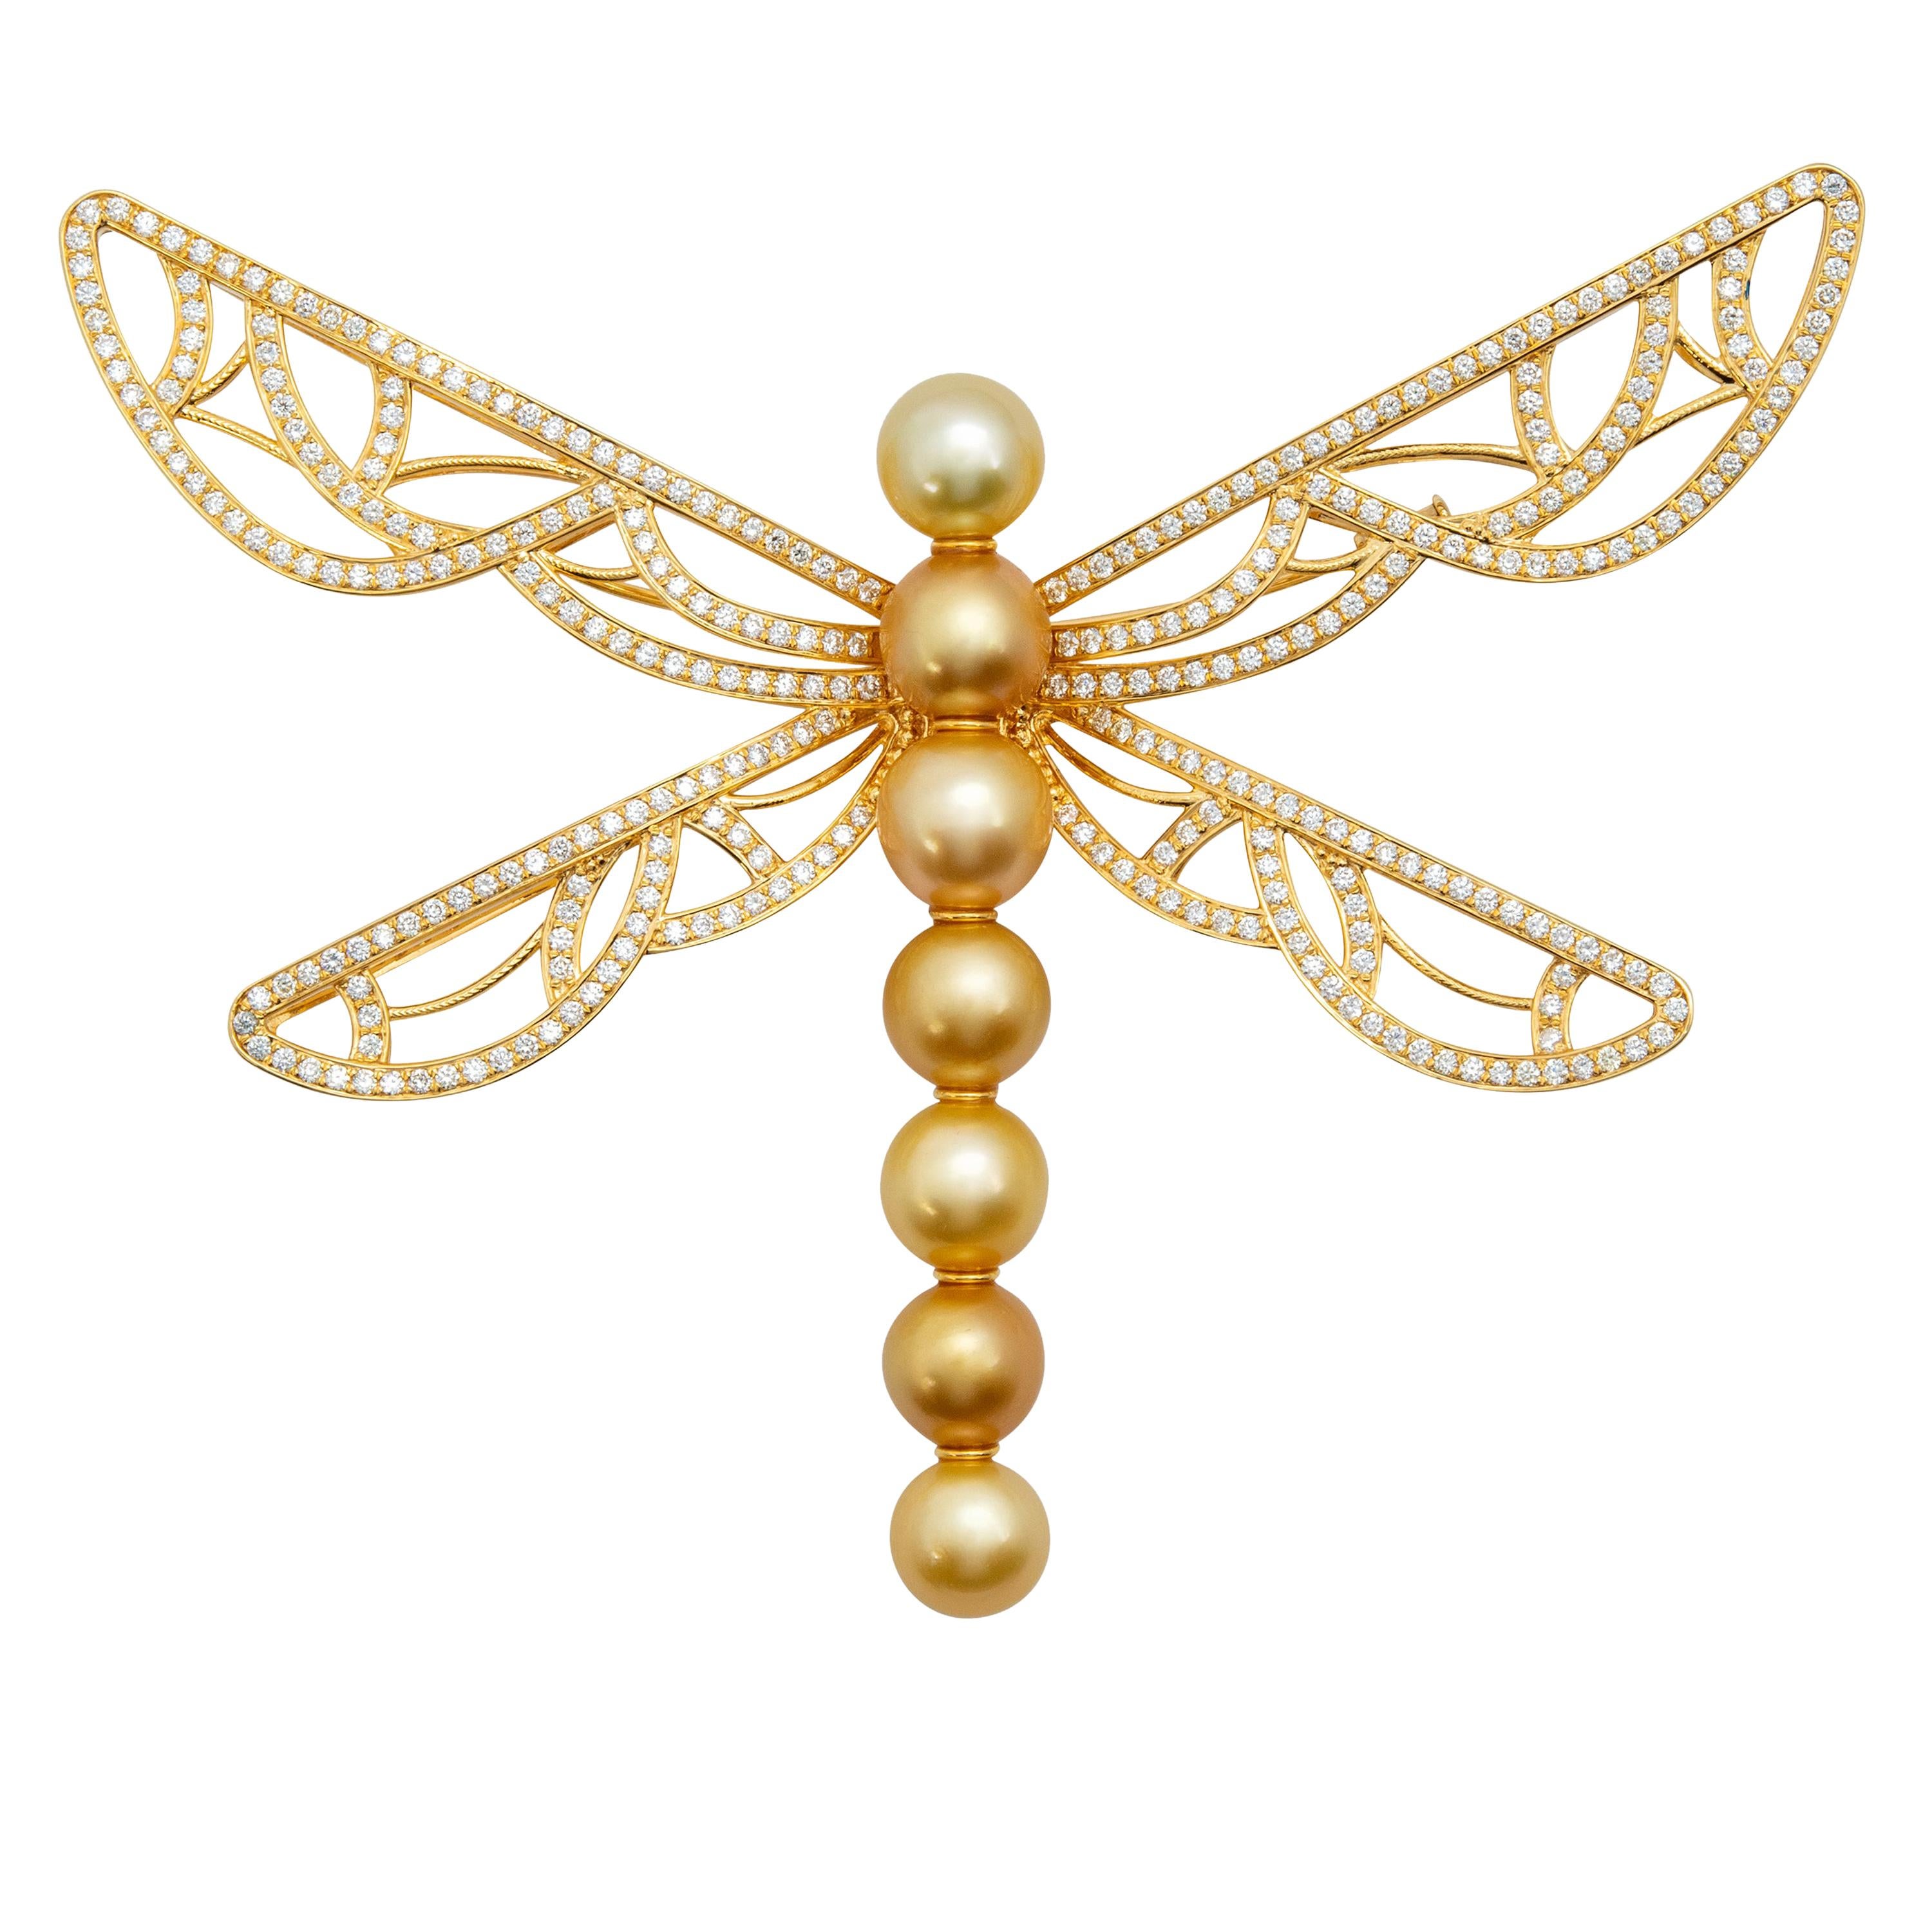 An Order of Bling Golden South Sea Pearl and Diamond Brooch and Pendant For Sale